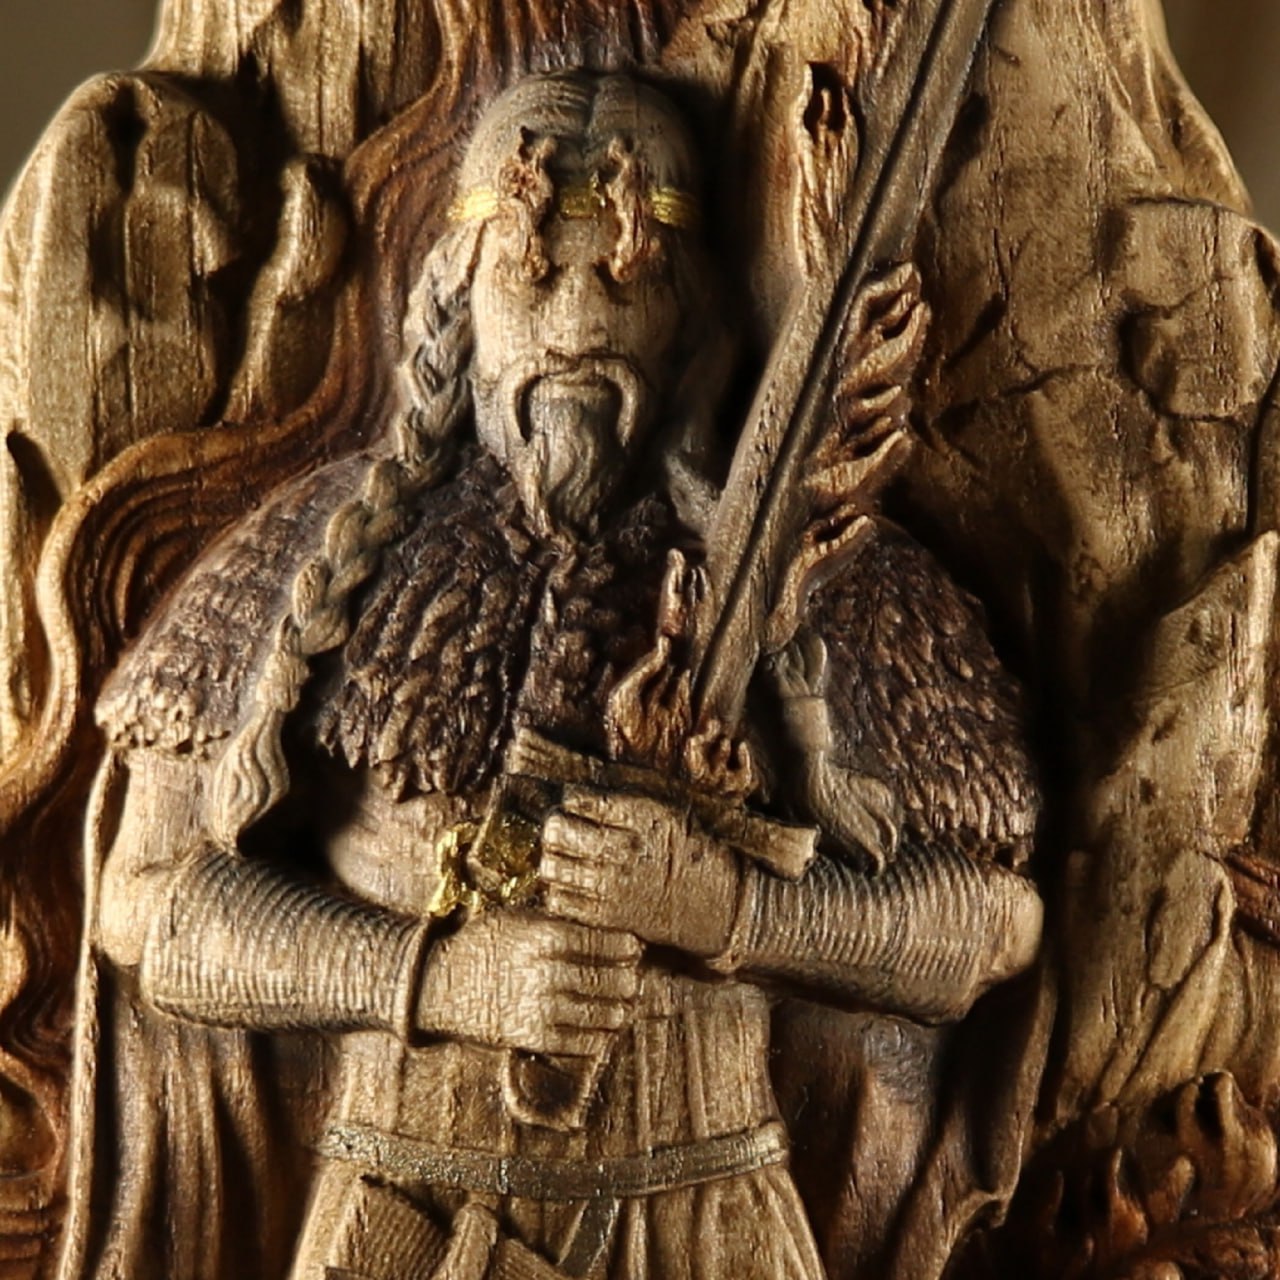 Surtr, The Mighty Fire Giant: Handcrafted Wood Carved Statue from Norse Mythology